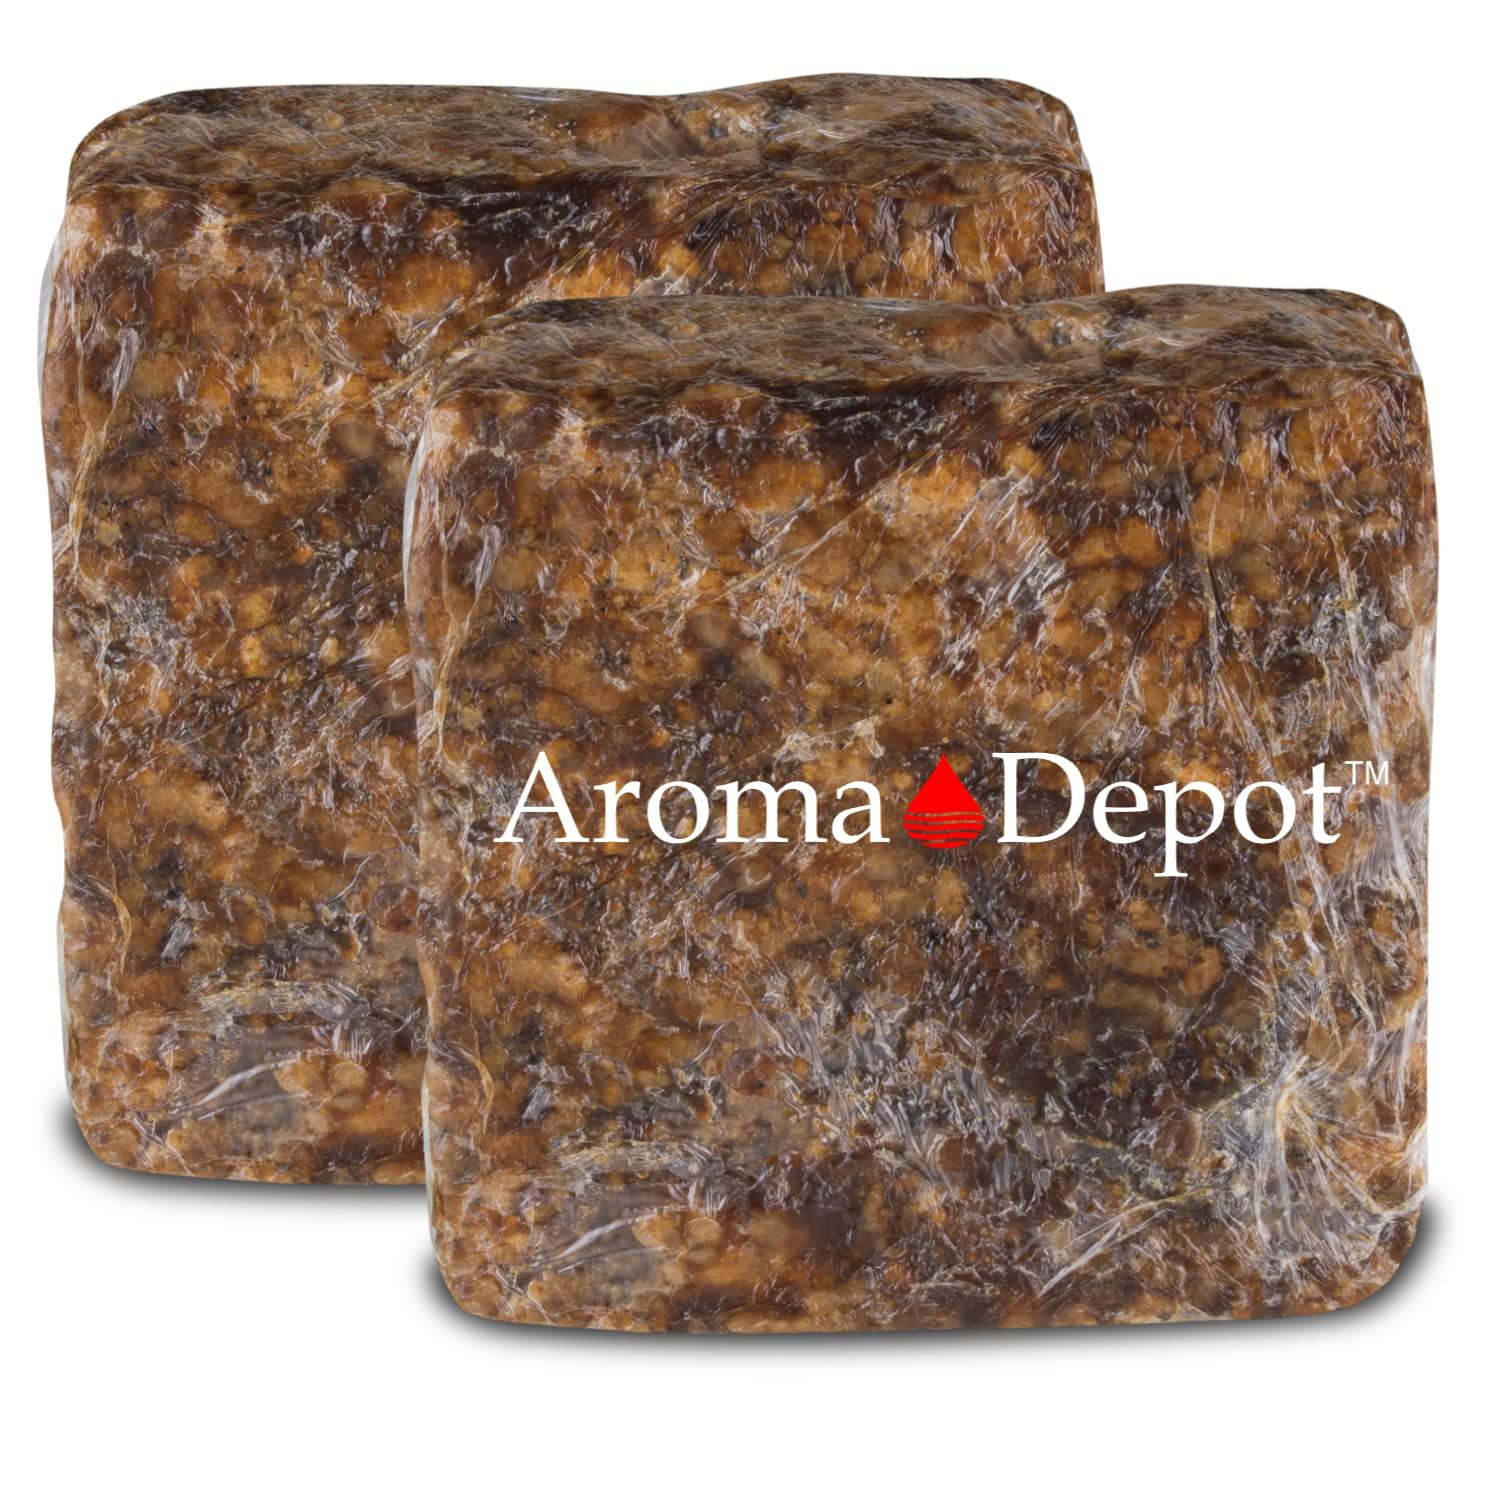 Aroma Depot Raw African Liquid 1/2 Gallon Black Soap 100% Natural soap for  Acne, Eczema, Psoriasis, and Dry Skin Scar Removal Face And Body Wash.